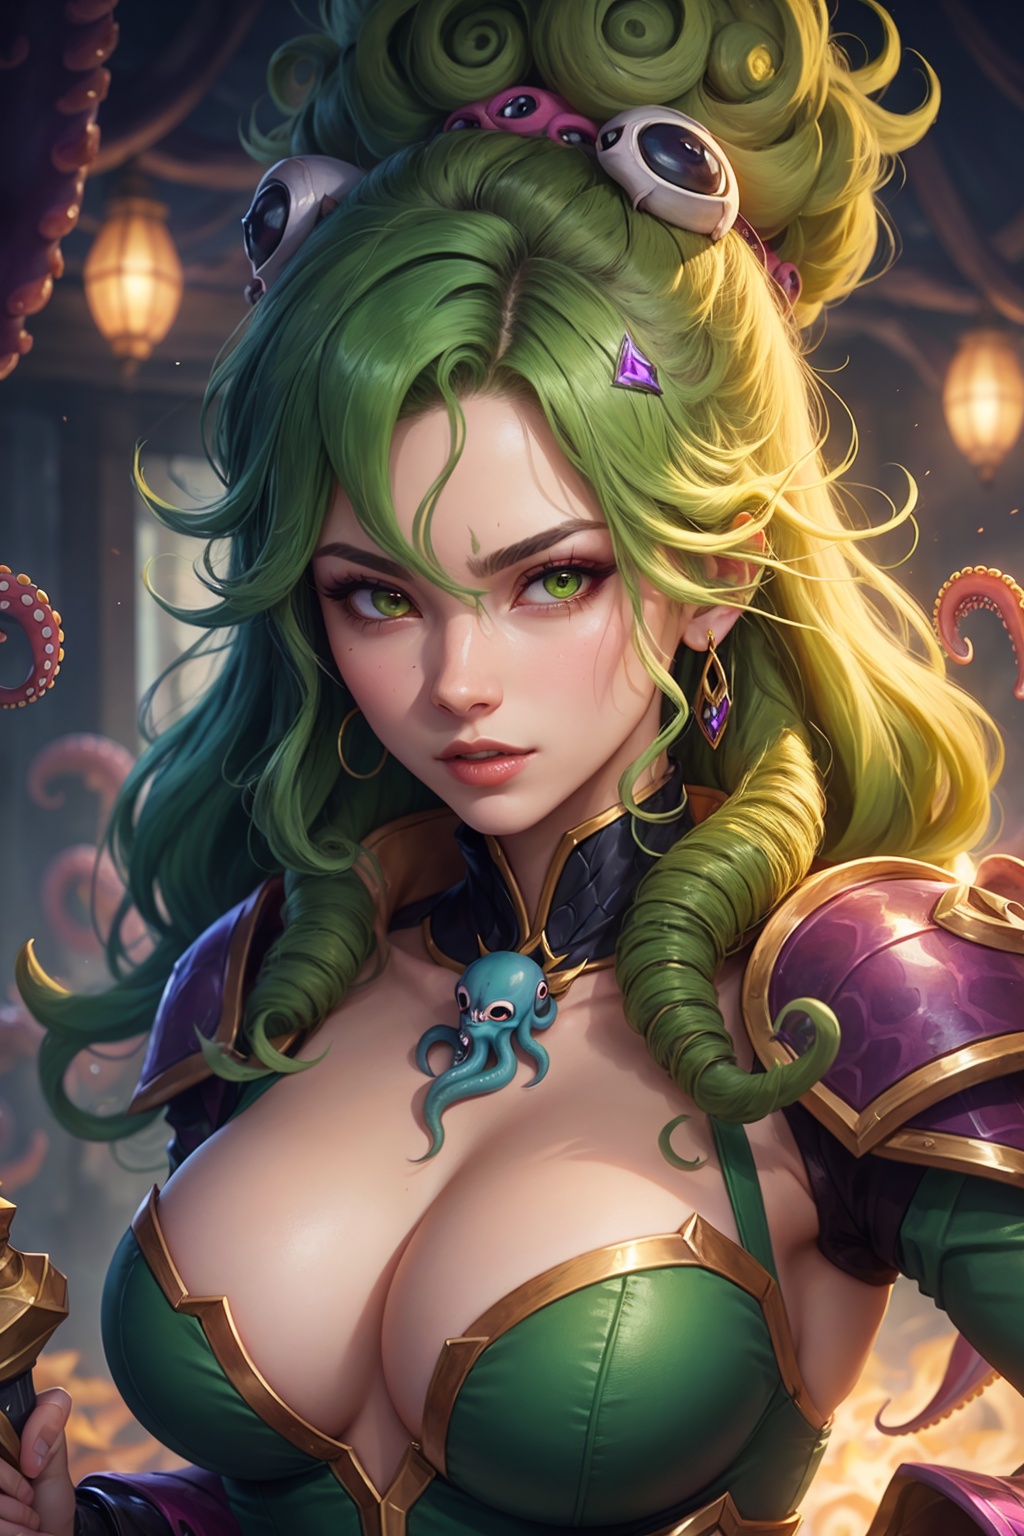 ((best quality)), ((masterpiece)), (detailed), woman with green hair, holding a sword, (octopus goddess:1.3), close-up portrait, goddess skull, (Senna from League of Legends:1.1), (Tatsumaki with green curly hair:1.2), card game illustration, thick brush, HD anime wallpaper, (Akali from League of Legends:1.1), 8k resolution, (rating_explicit), (score_9, score_8_up, score_7_up, score_6_up, score_5_up, score_4_up, high res, 4k)